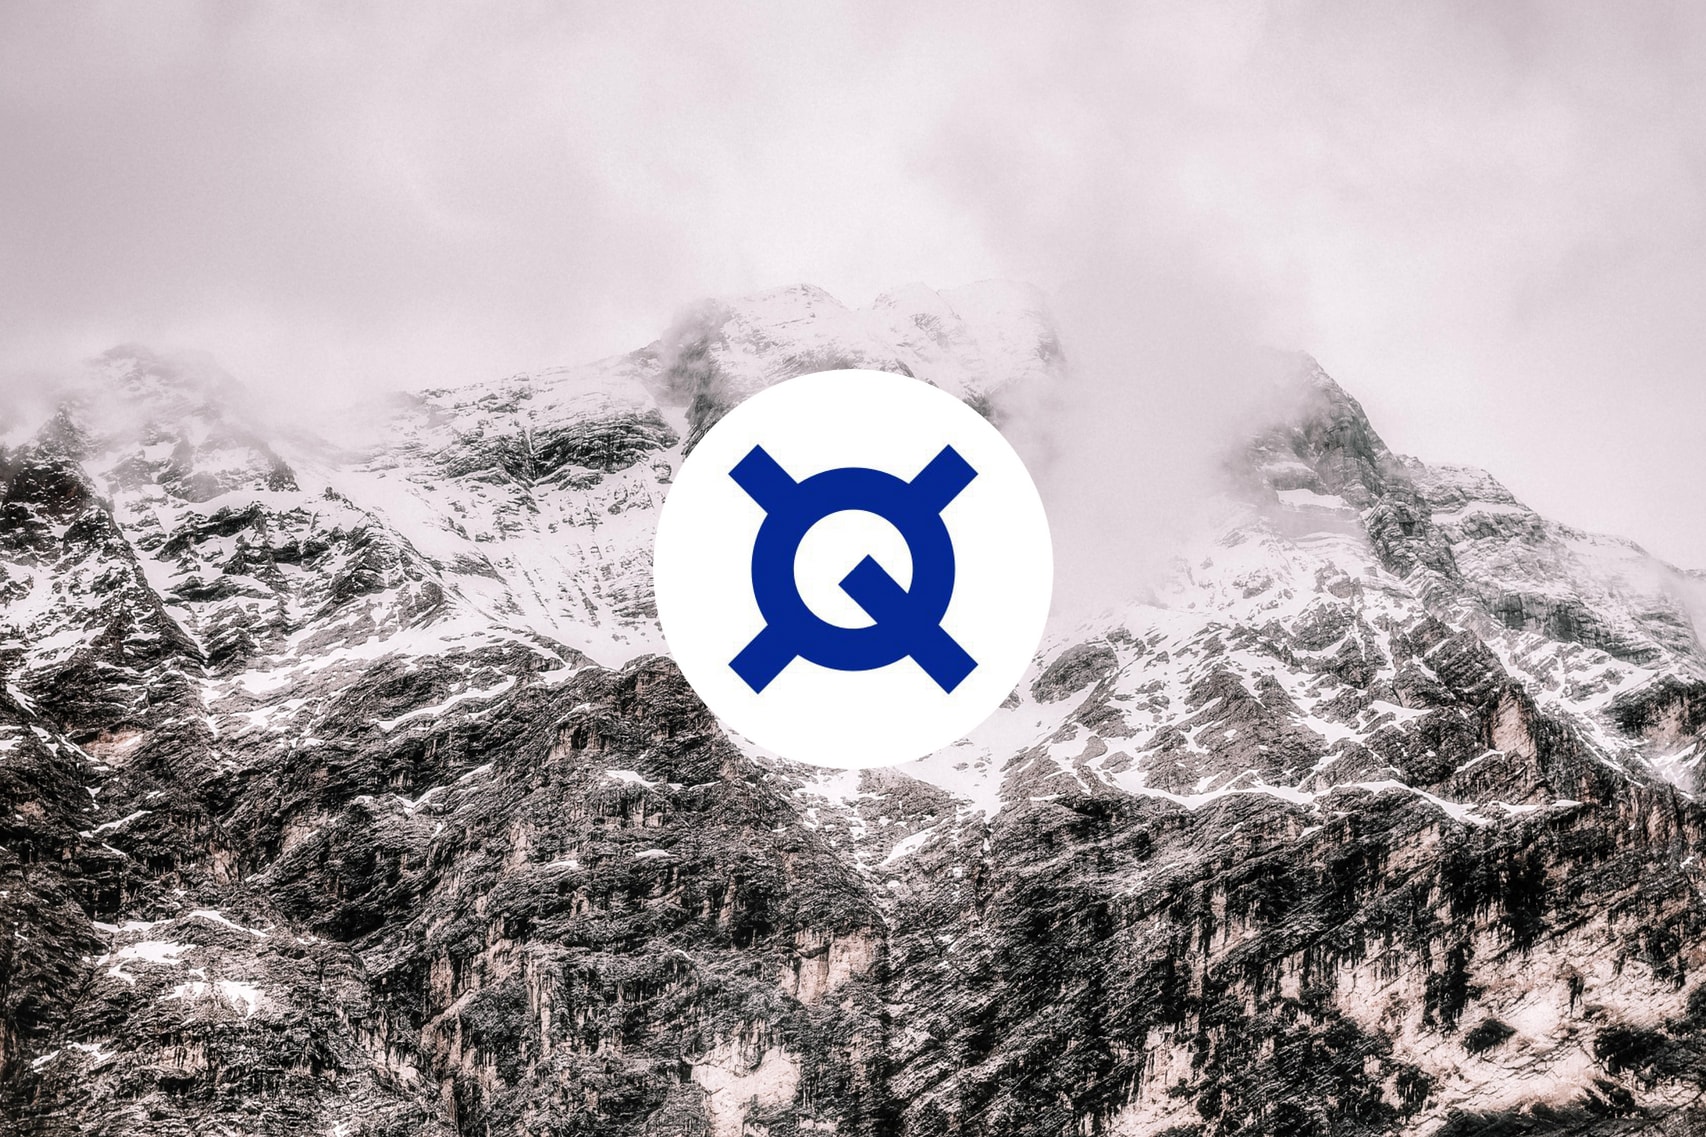 Why QSP is A Smart Long-Term Investment